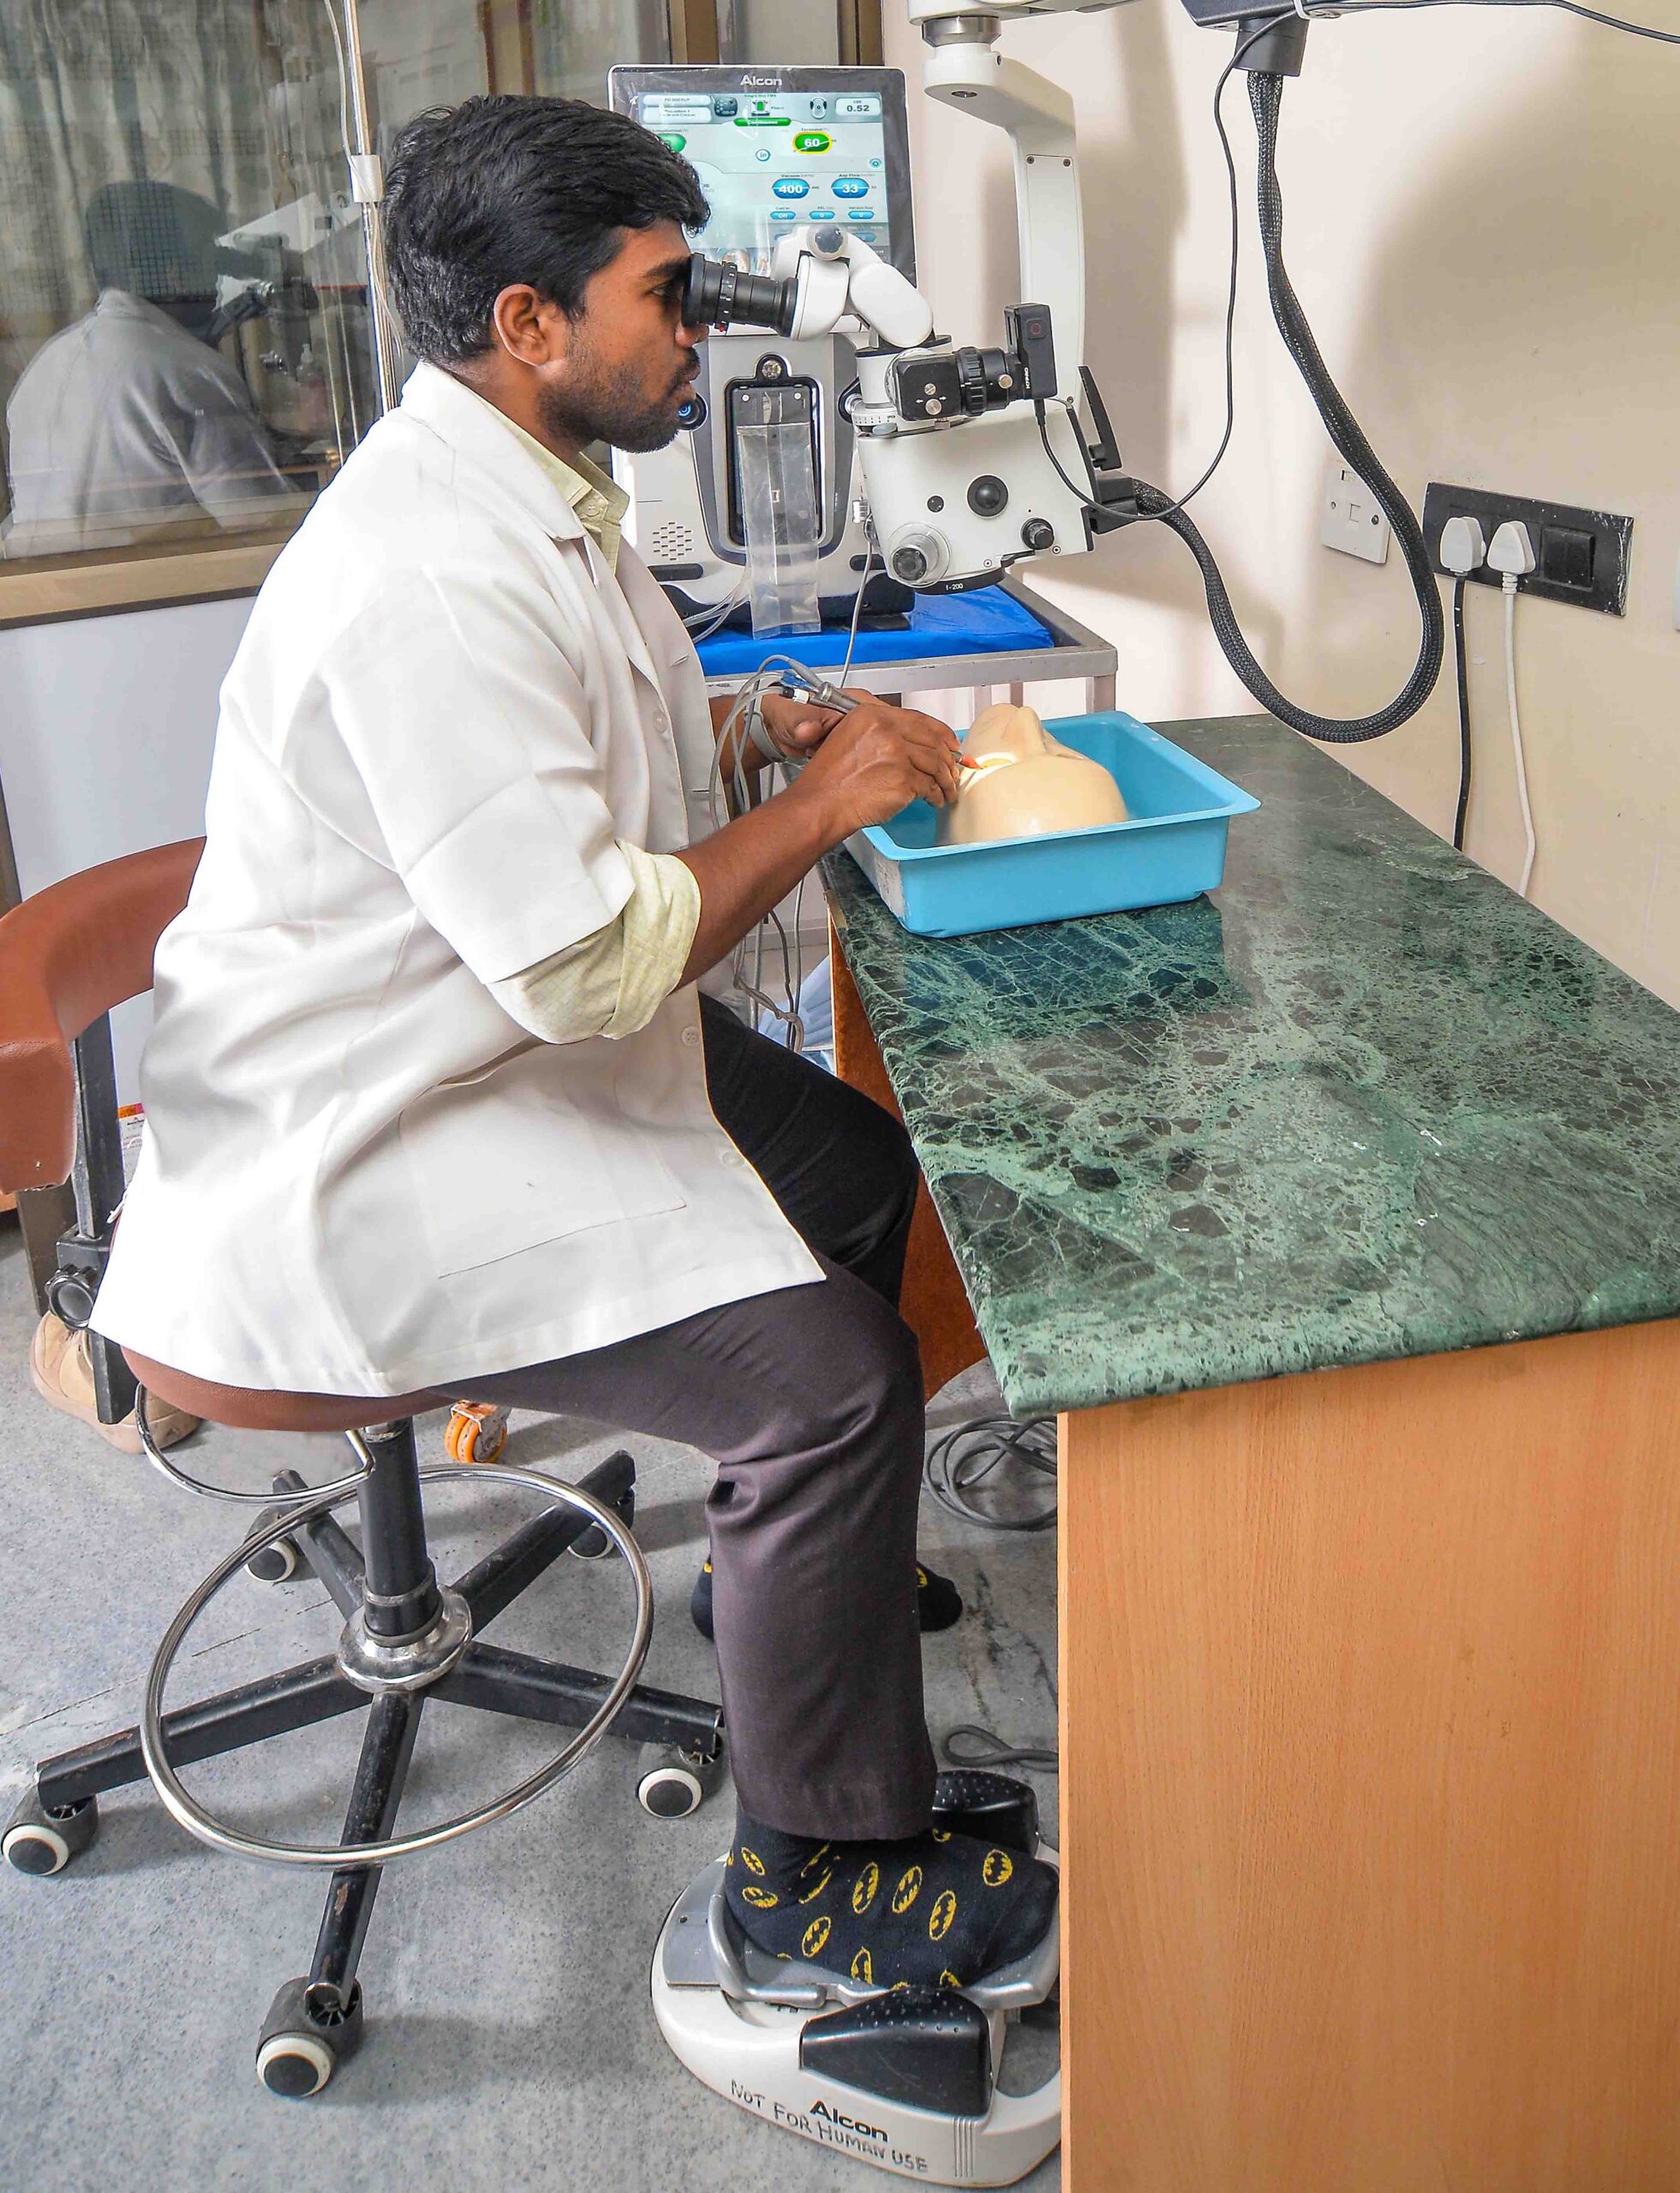 By using phaco machine in the wet lab, surgeons learn the principles of phaco while practising use of the foot pedal. INDIA (Photo: Aravind CC BY-NC-SA 4.0)